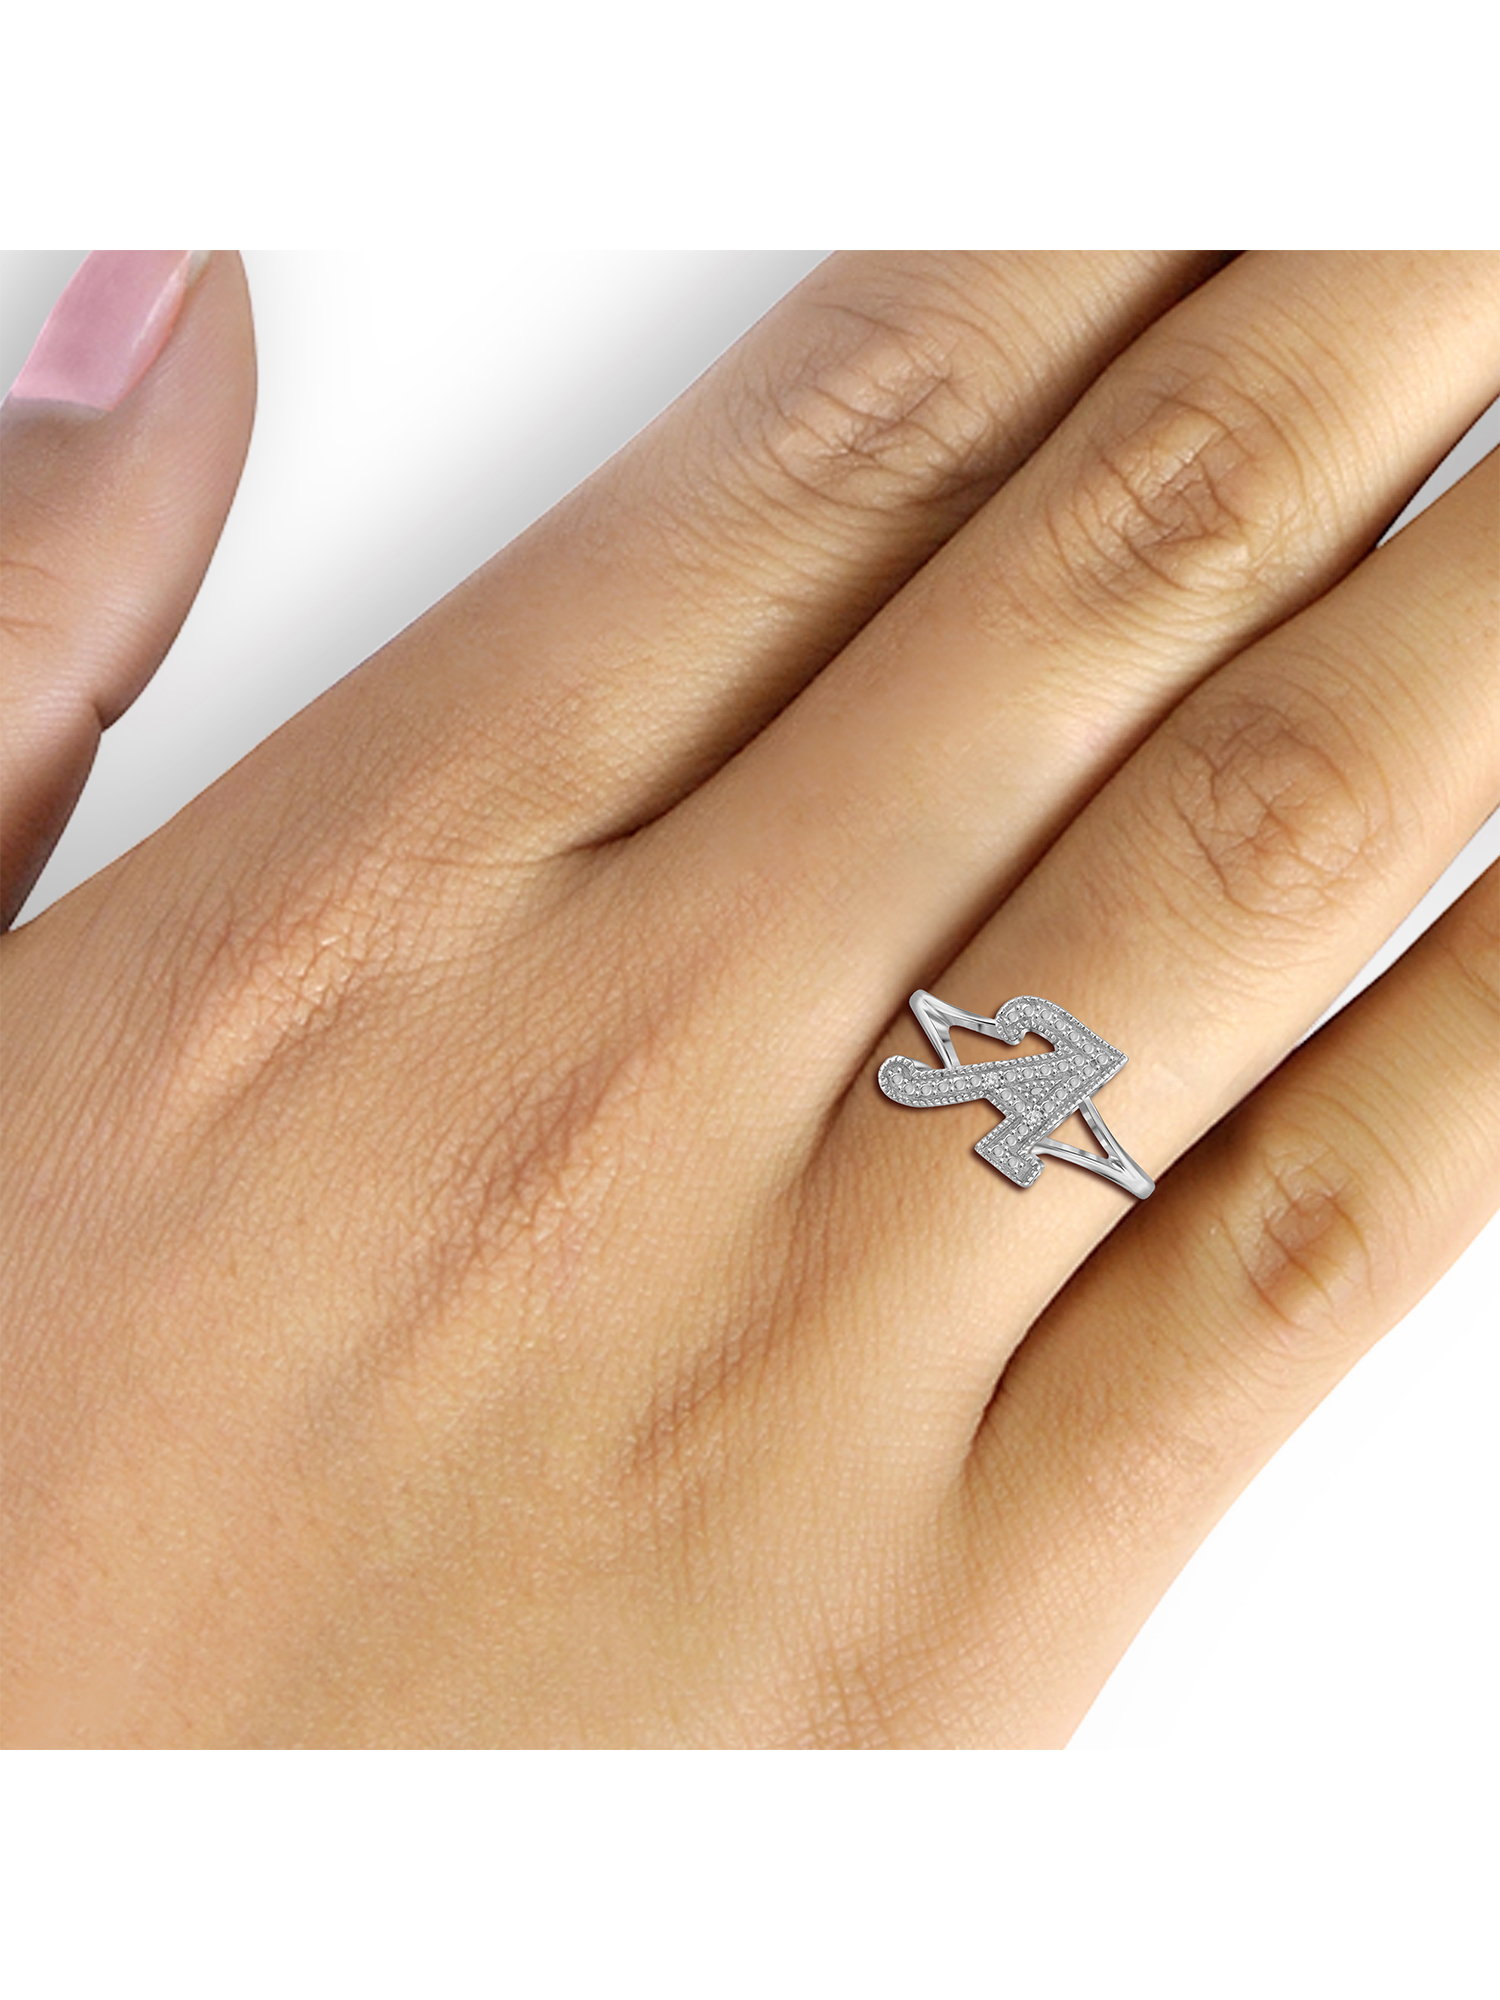 JewelersClub Accent White Diamond Initial Letter Ring for Women | Customizable Sterling Silver A Alphabet Monogram Ring for Girls | Cursive Script Capital Letters | Personalized Jewelry Gift for Her - image 2 of 4